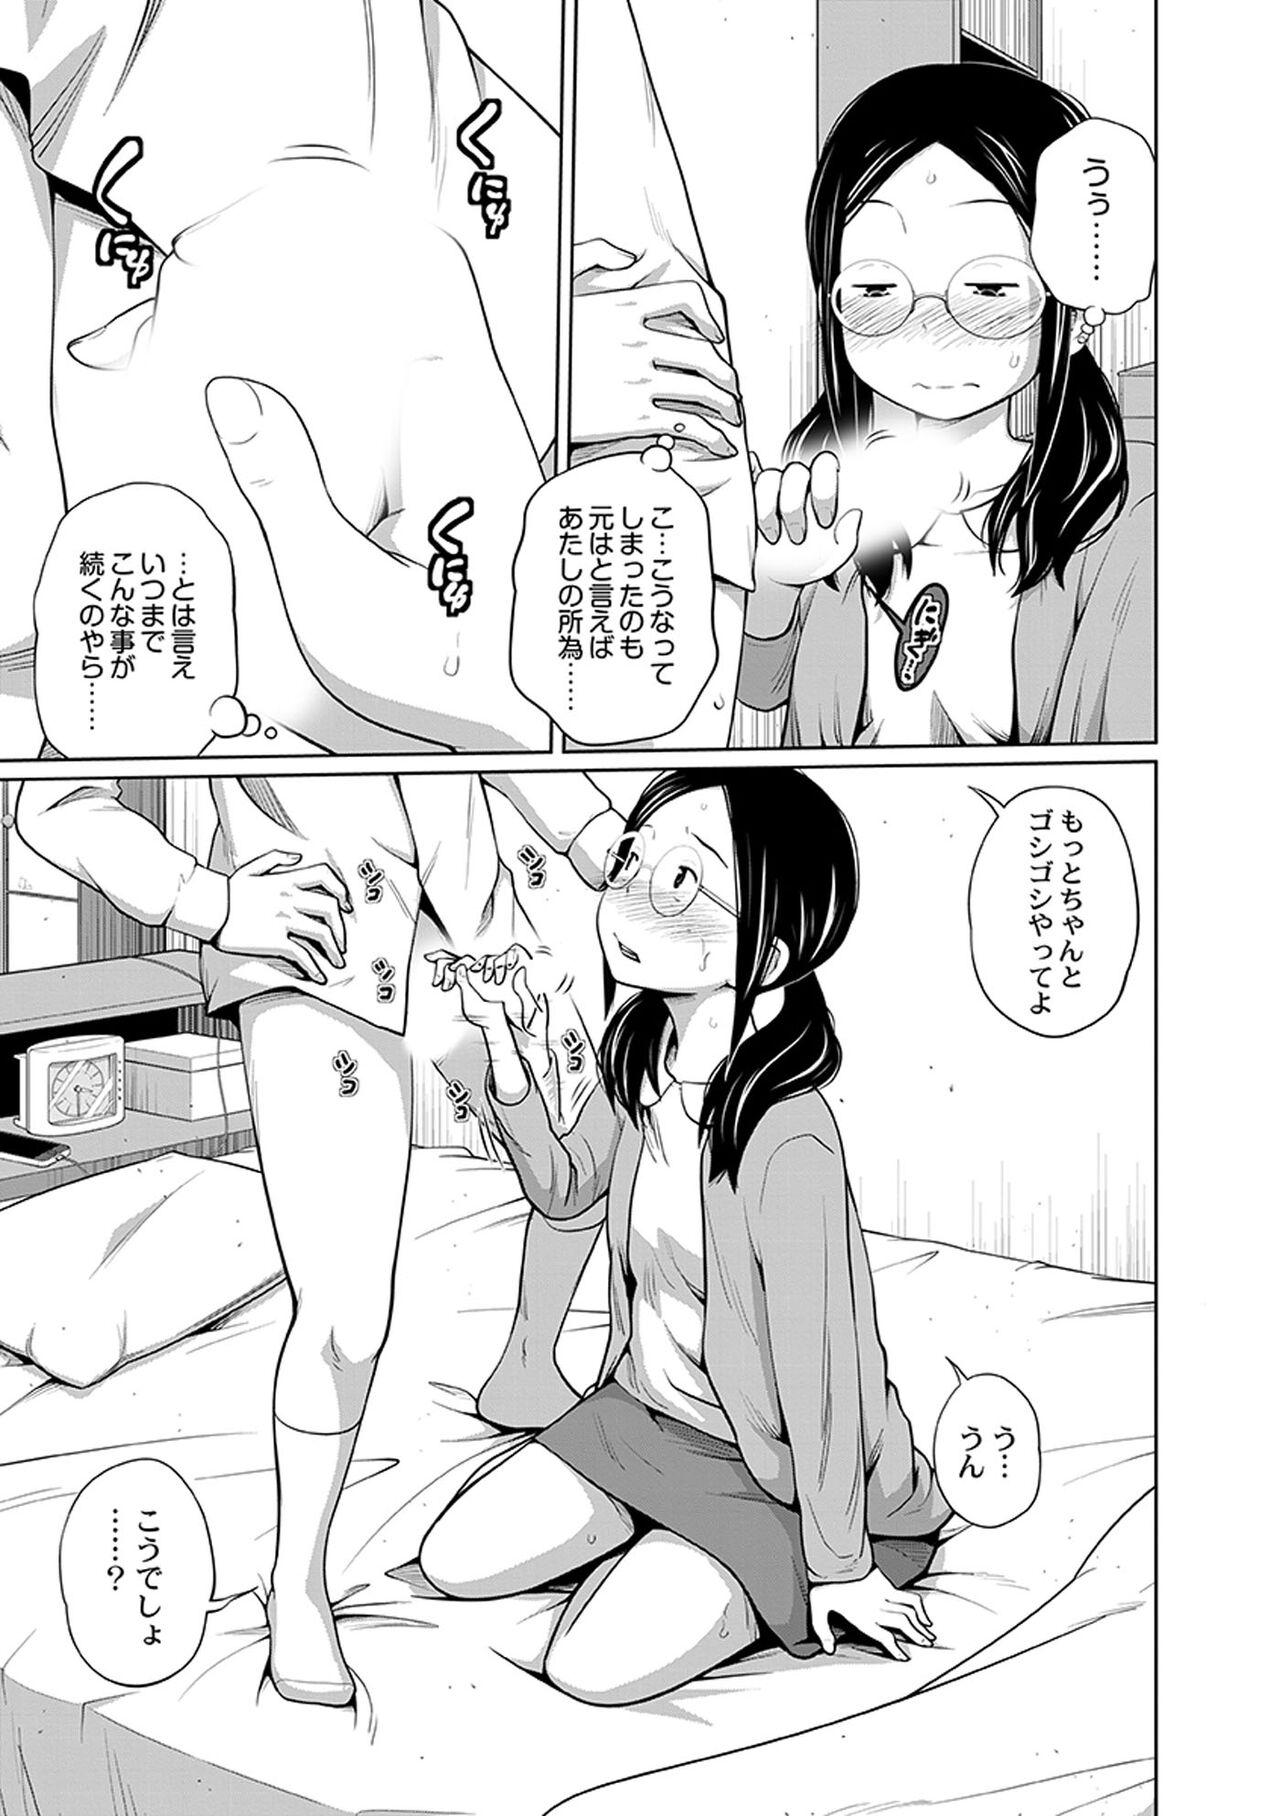 Shemale Sex Ane Megane - spectacled sister Private Sex - Page 7